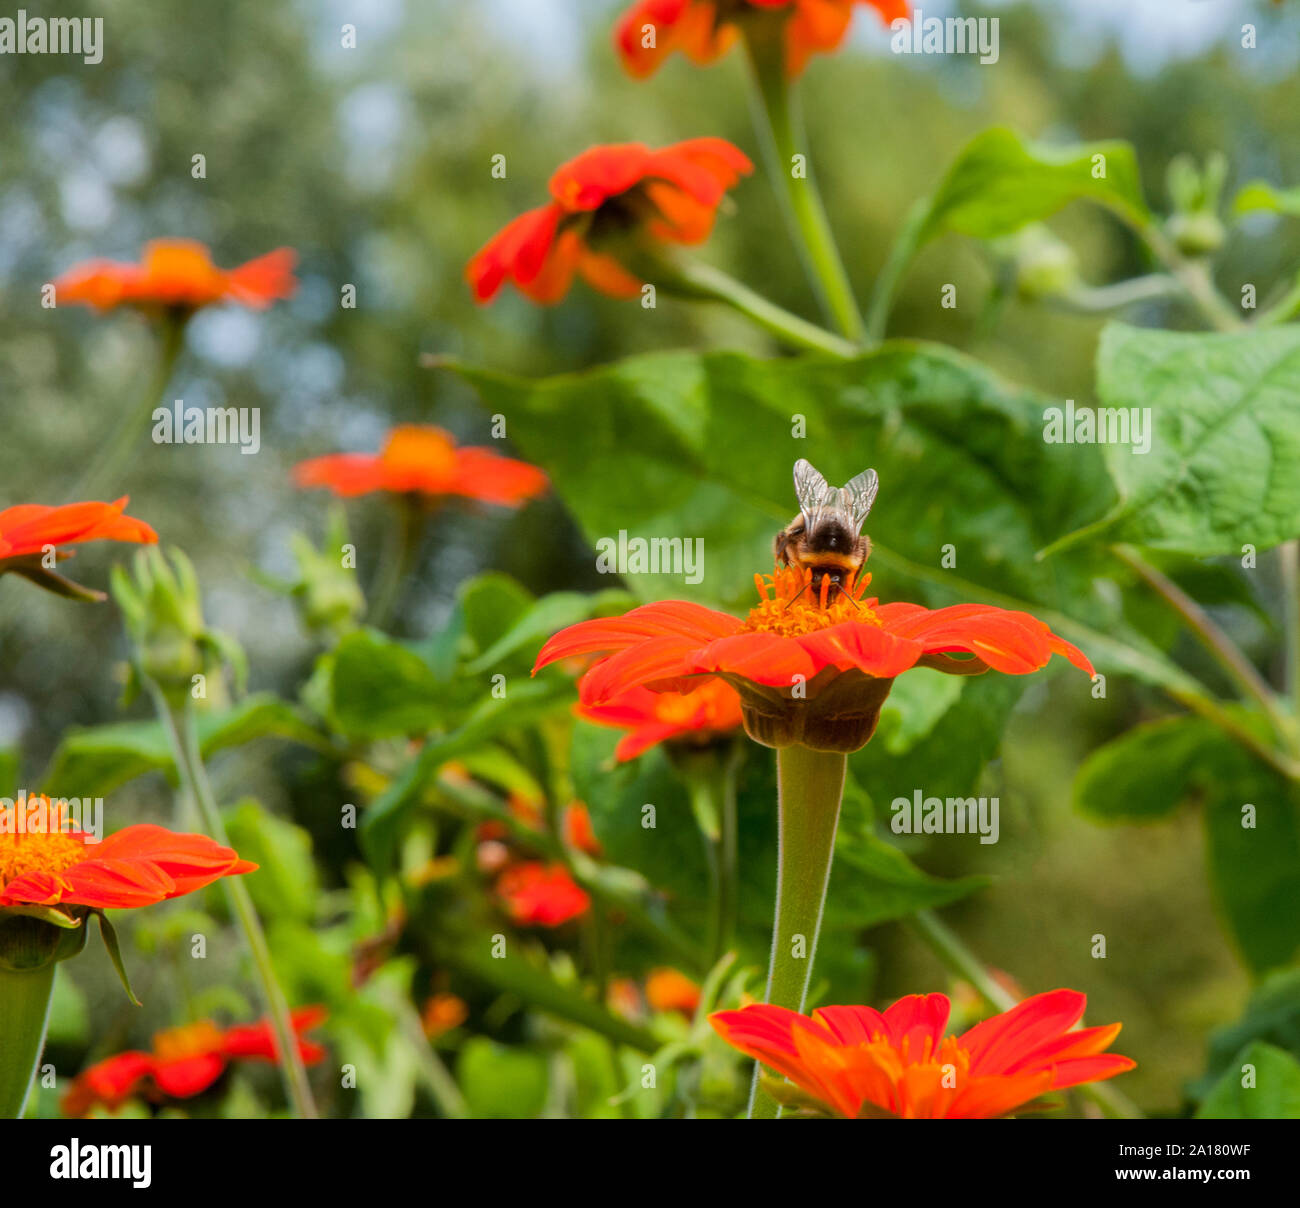 Bumble Bee Bombus terrestris collecting pollen from a Helenium flower showing wing and antennae detail  Wildlife and nature in its natural habitat Stock Photo